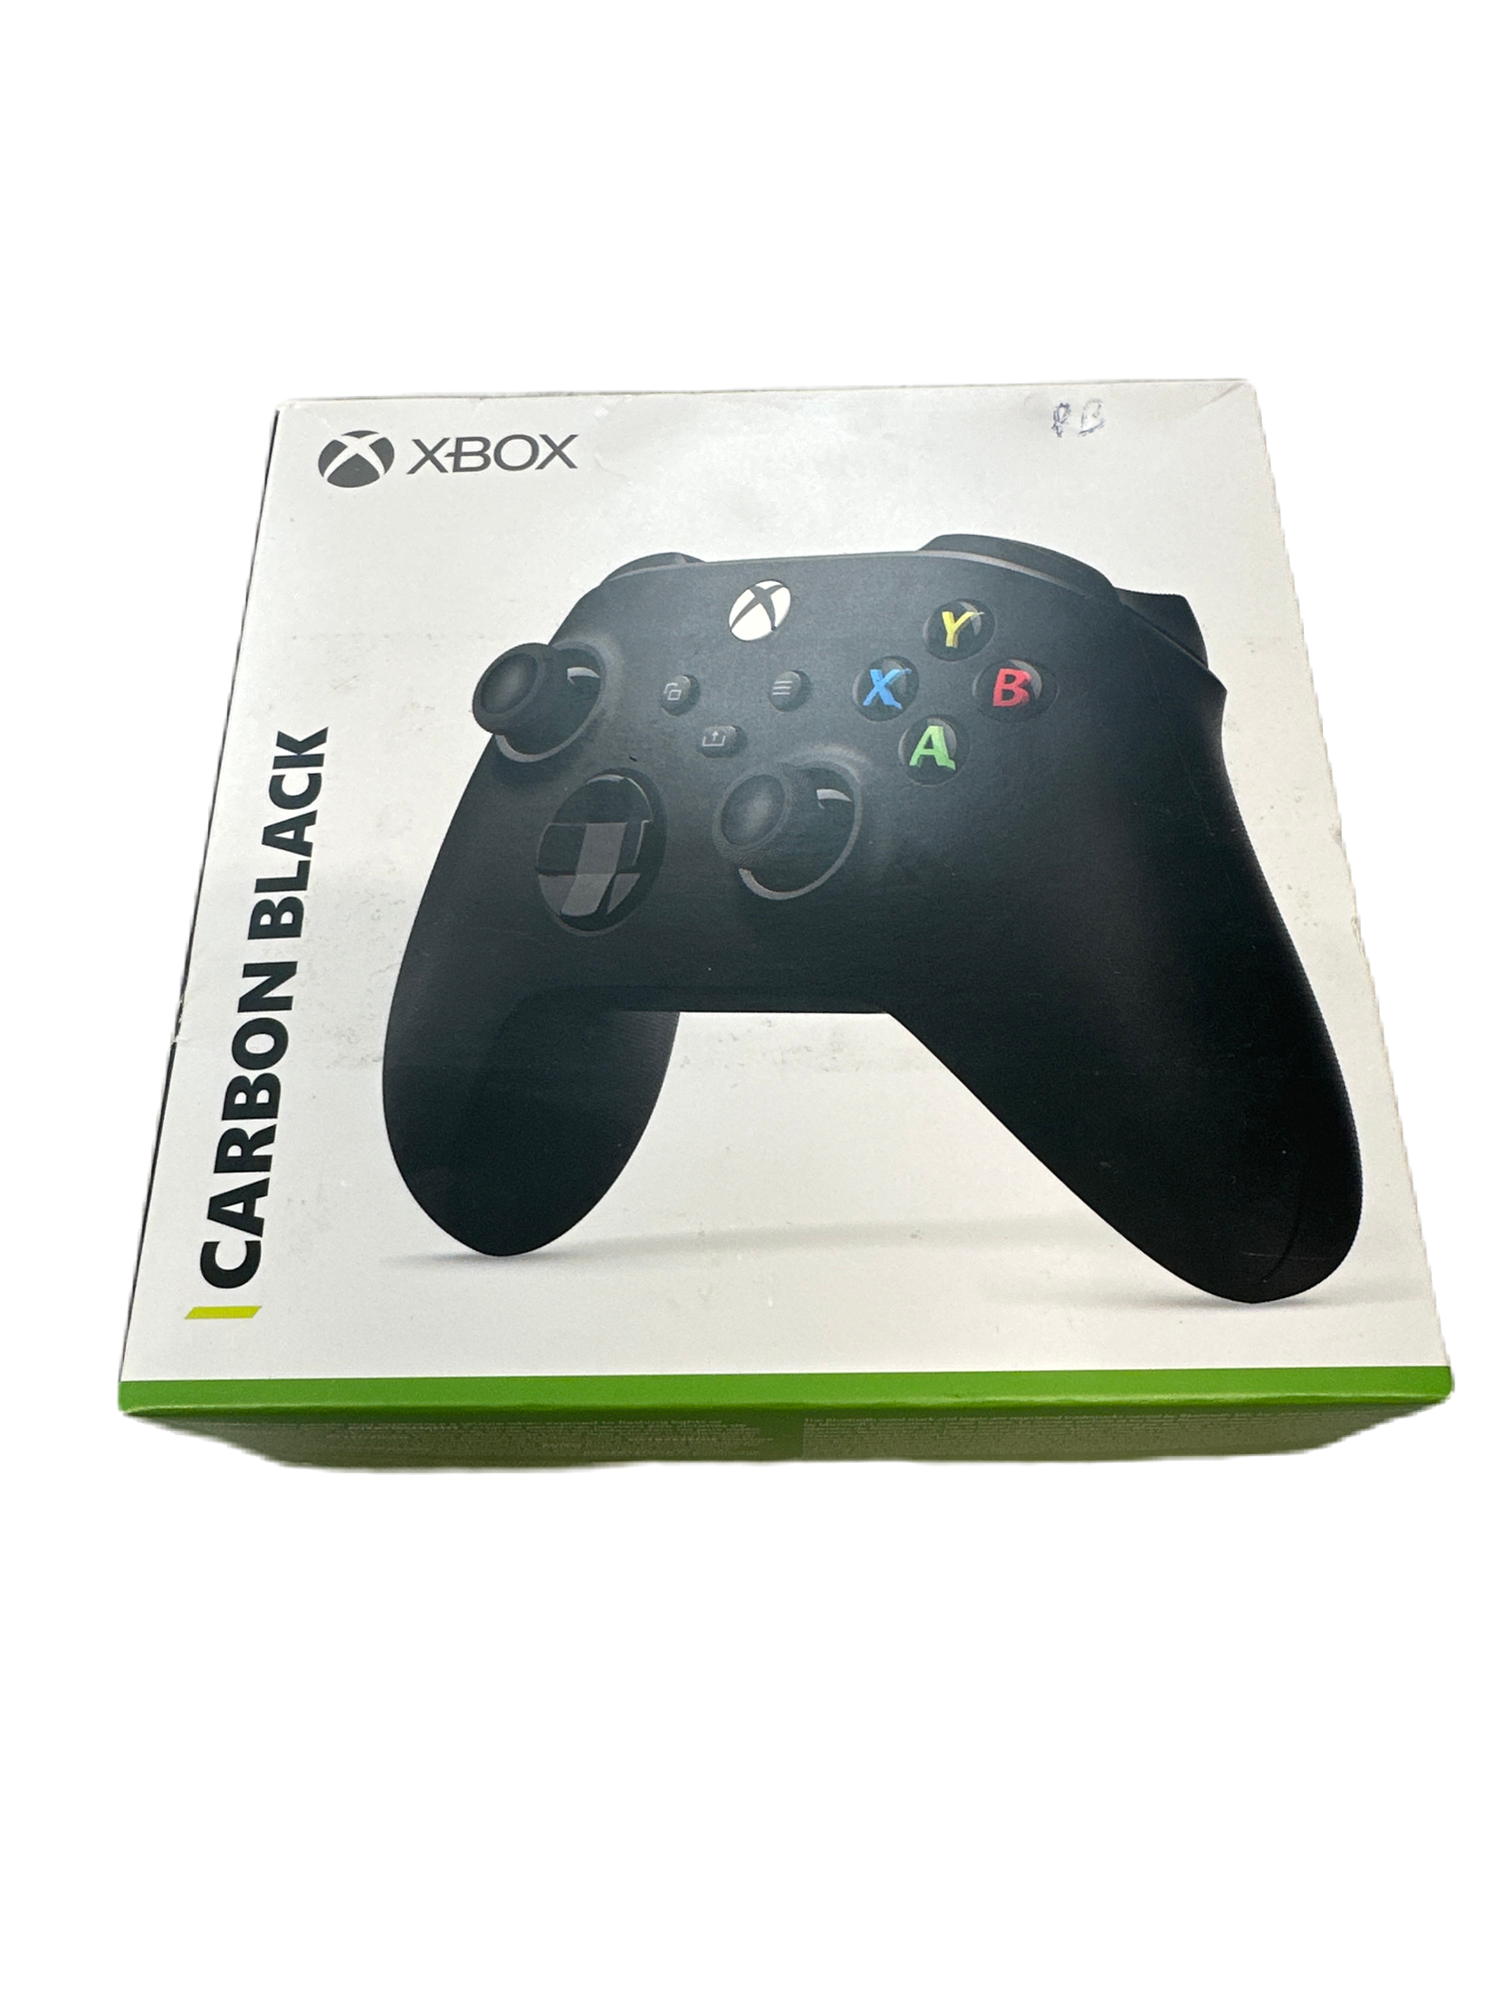 Xbox Series Controller - Carbon Black - Boxed Pad